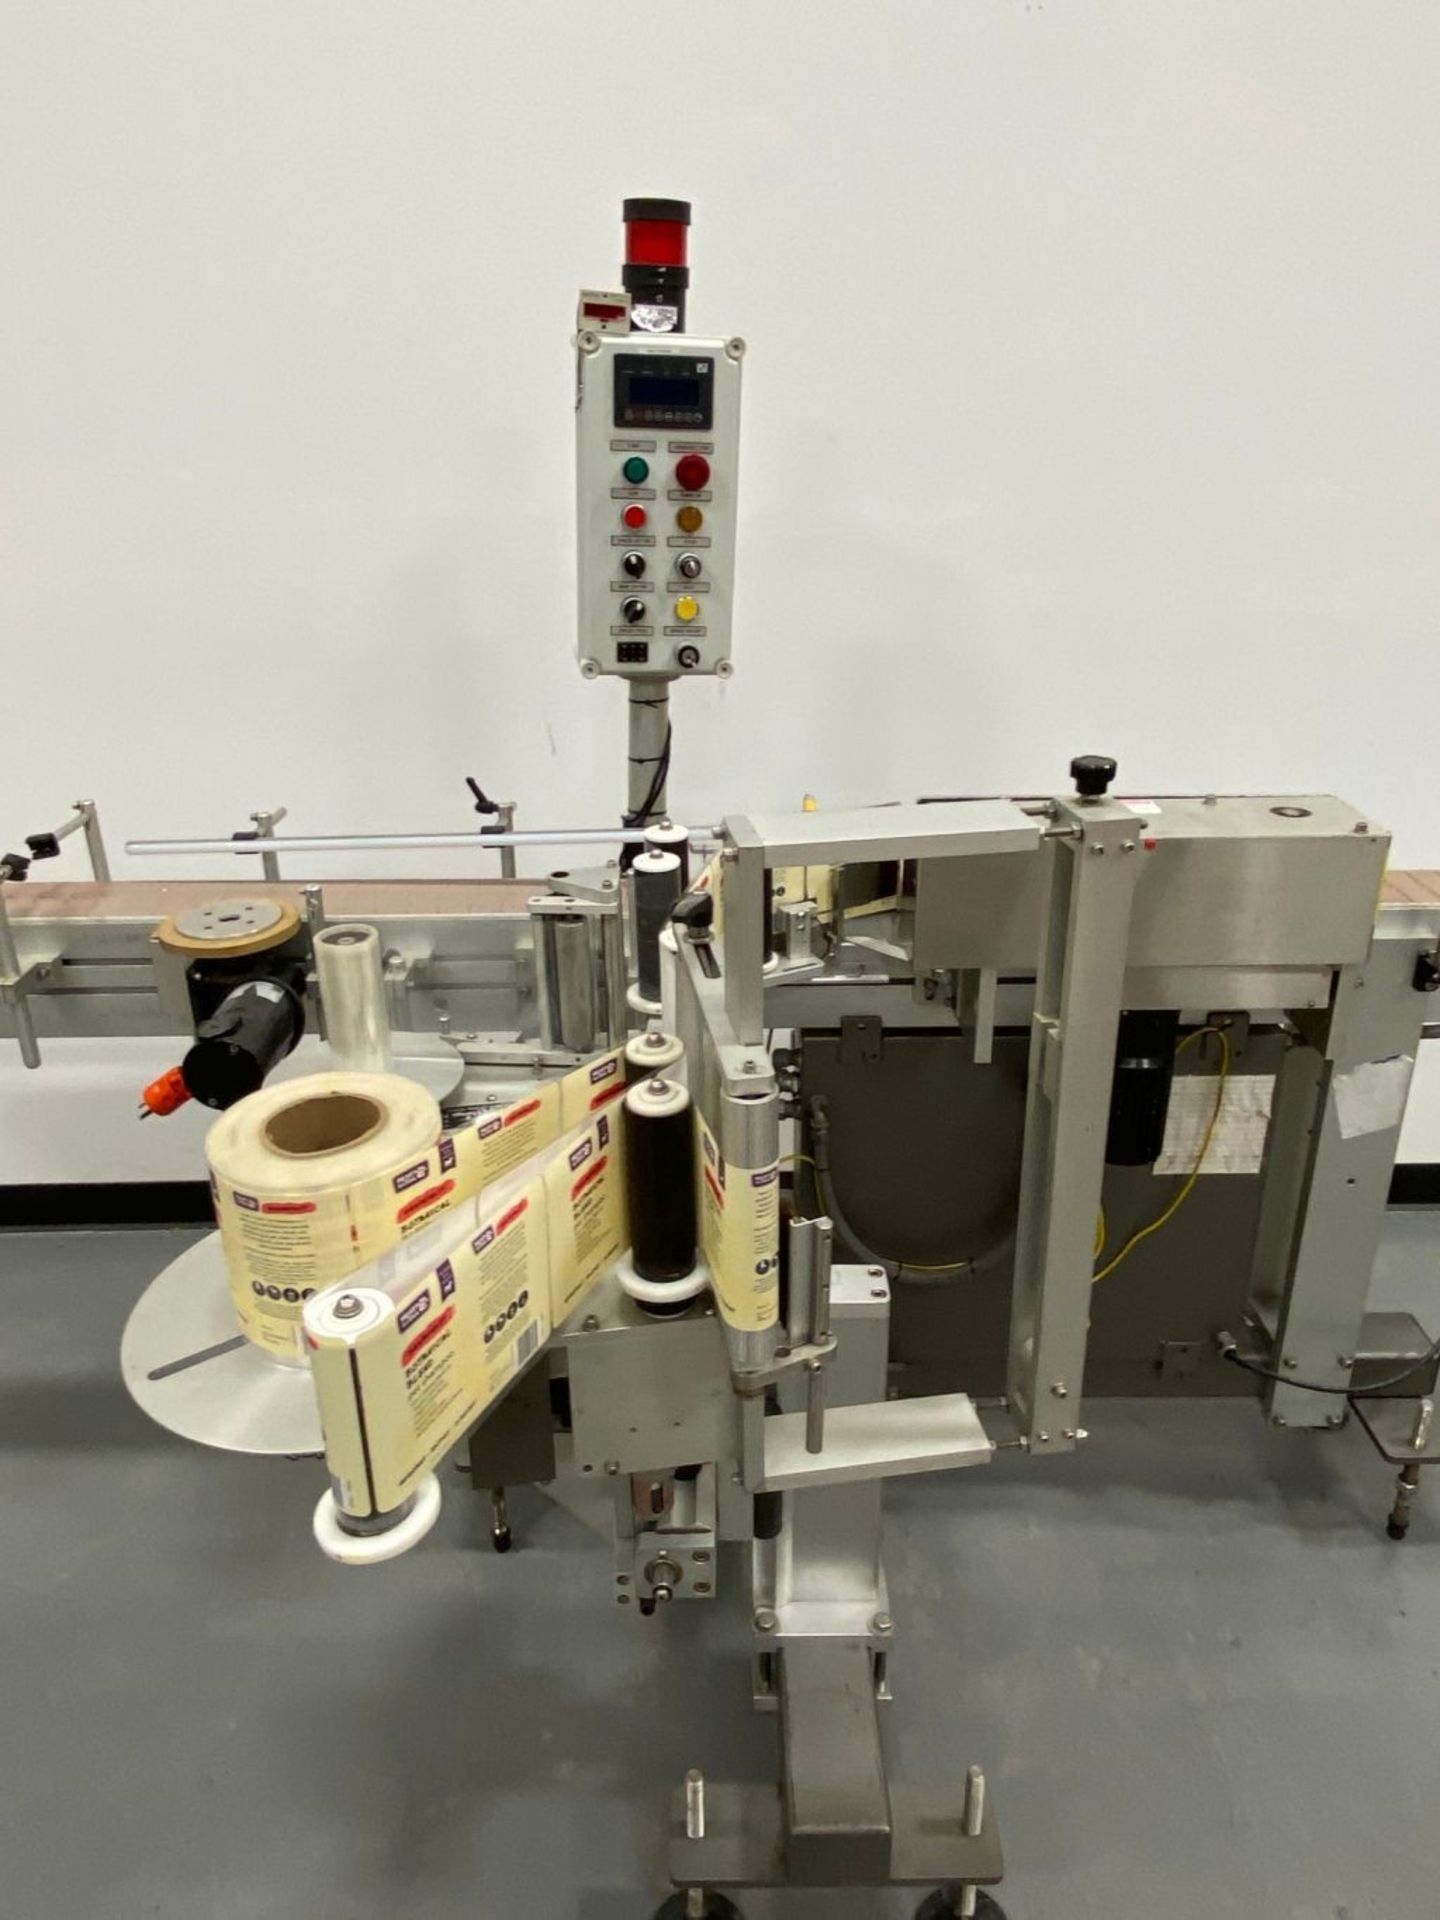 LSI Pressure Sensitive Wraparound Labeler. Model 1500. 120V, 60Hz, 1Ph, 15A. As shown in photos. - Image 4 of 5